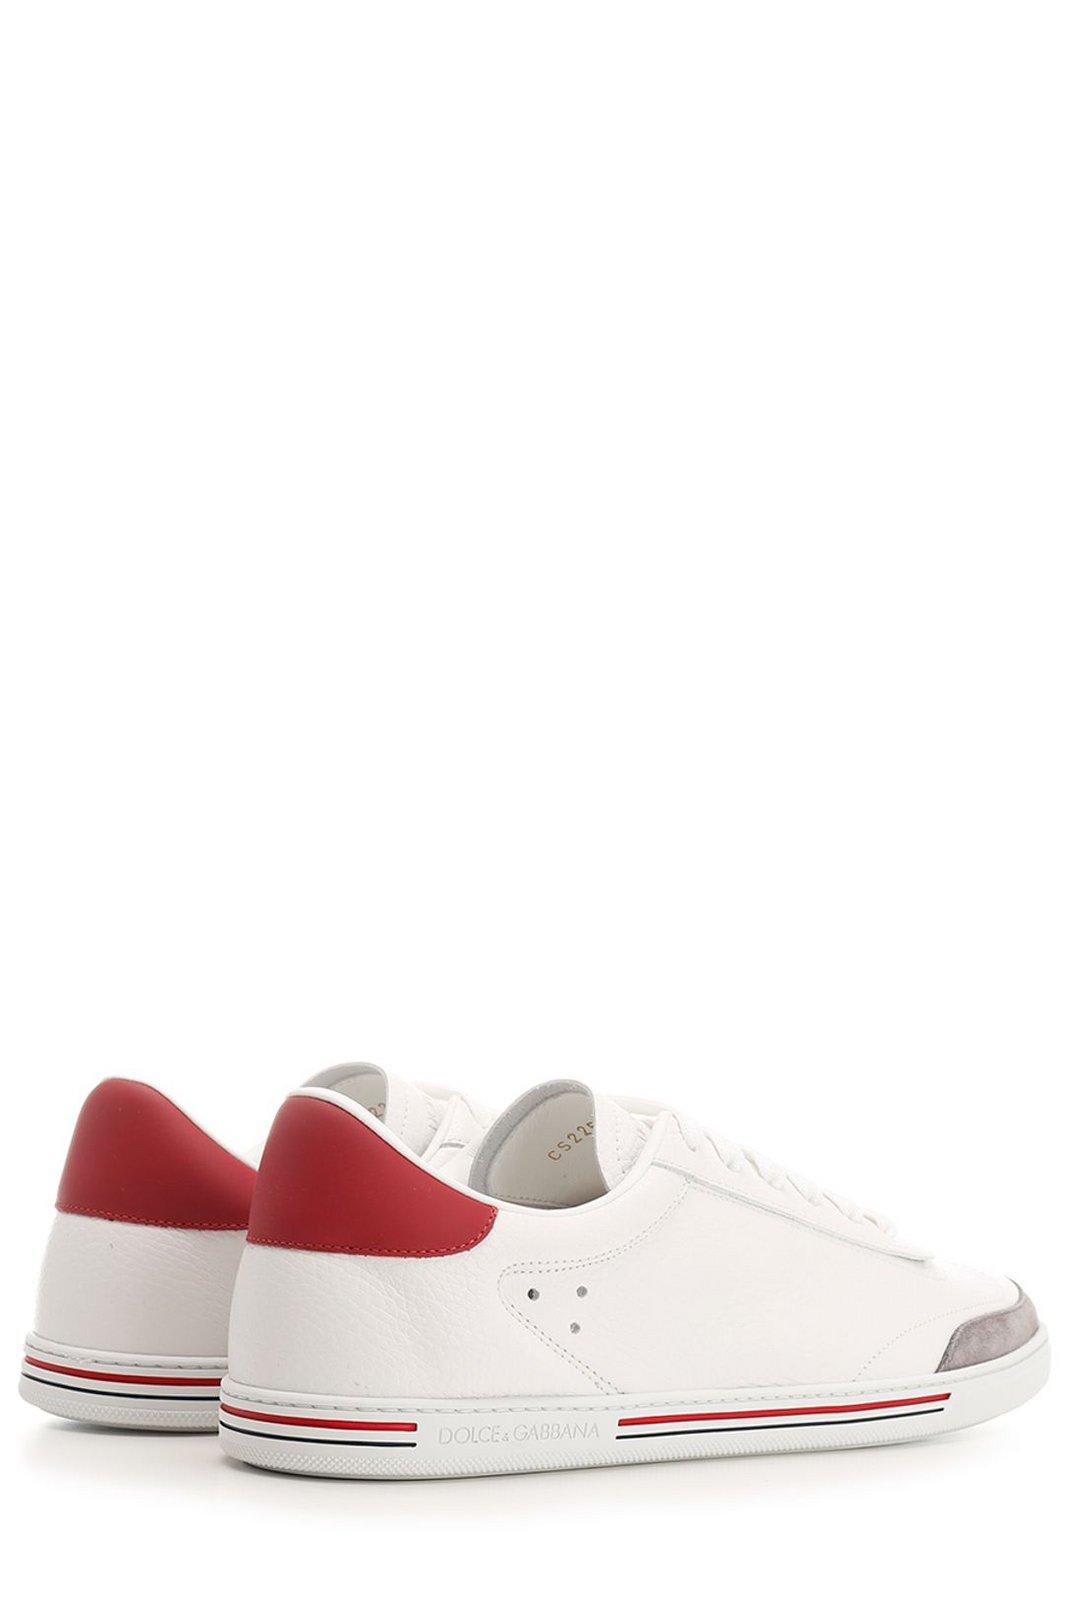 Shop Dolce & Gabbana Stripe-detailed Round Toe Sneakers In Bianco